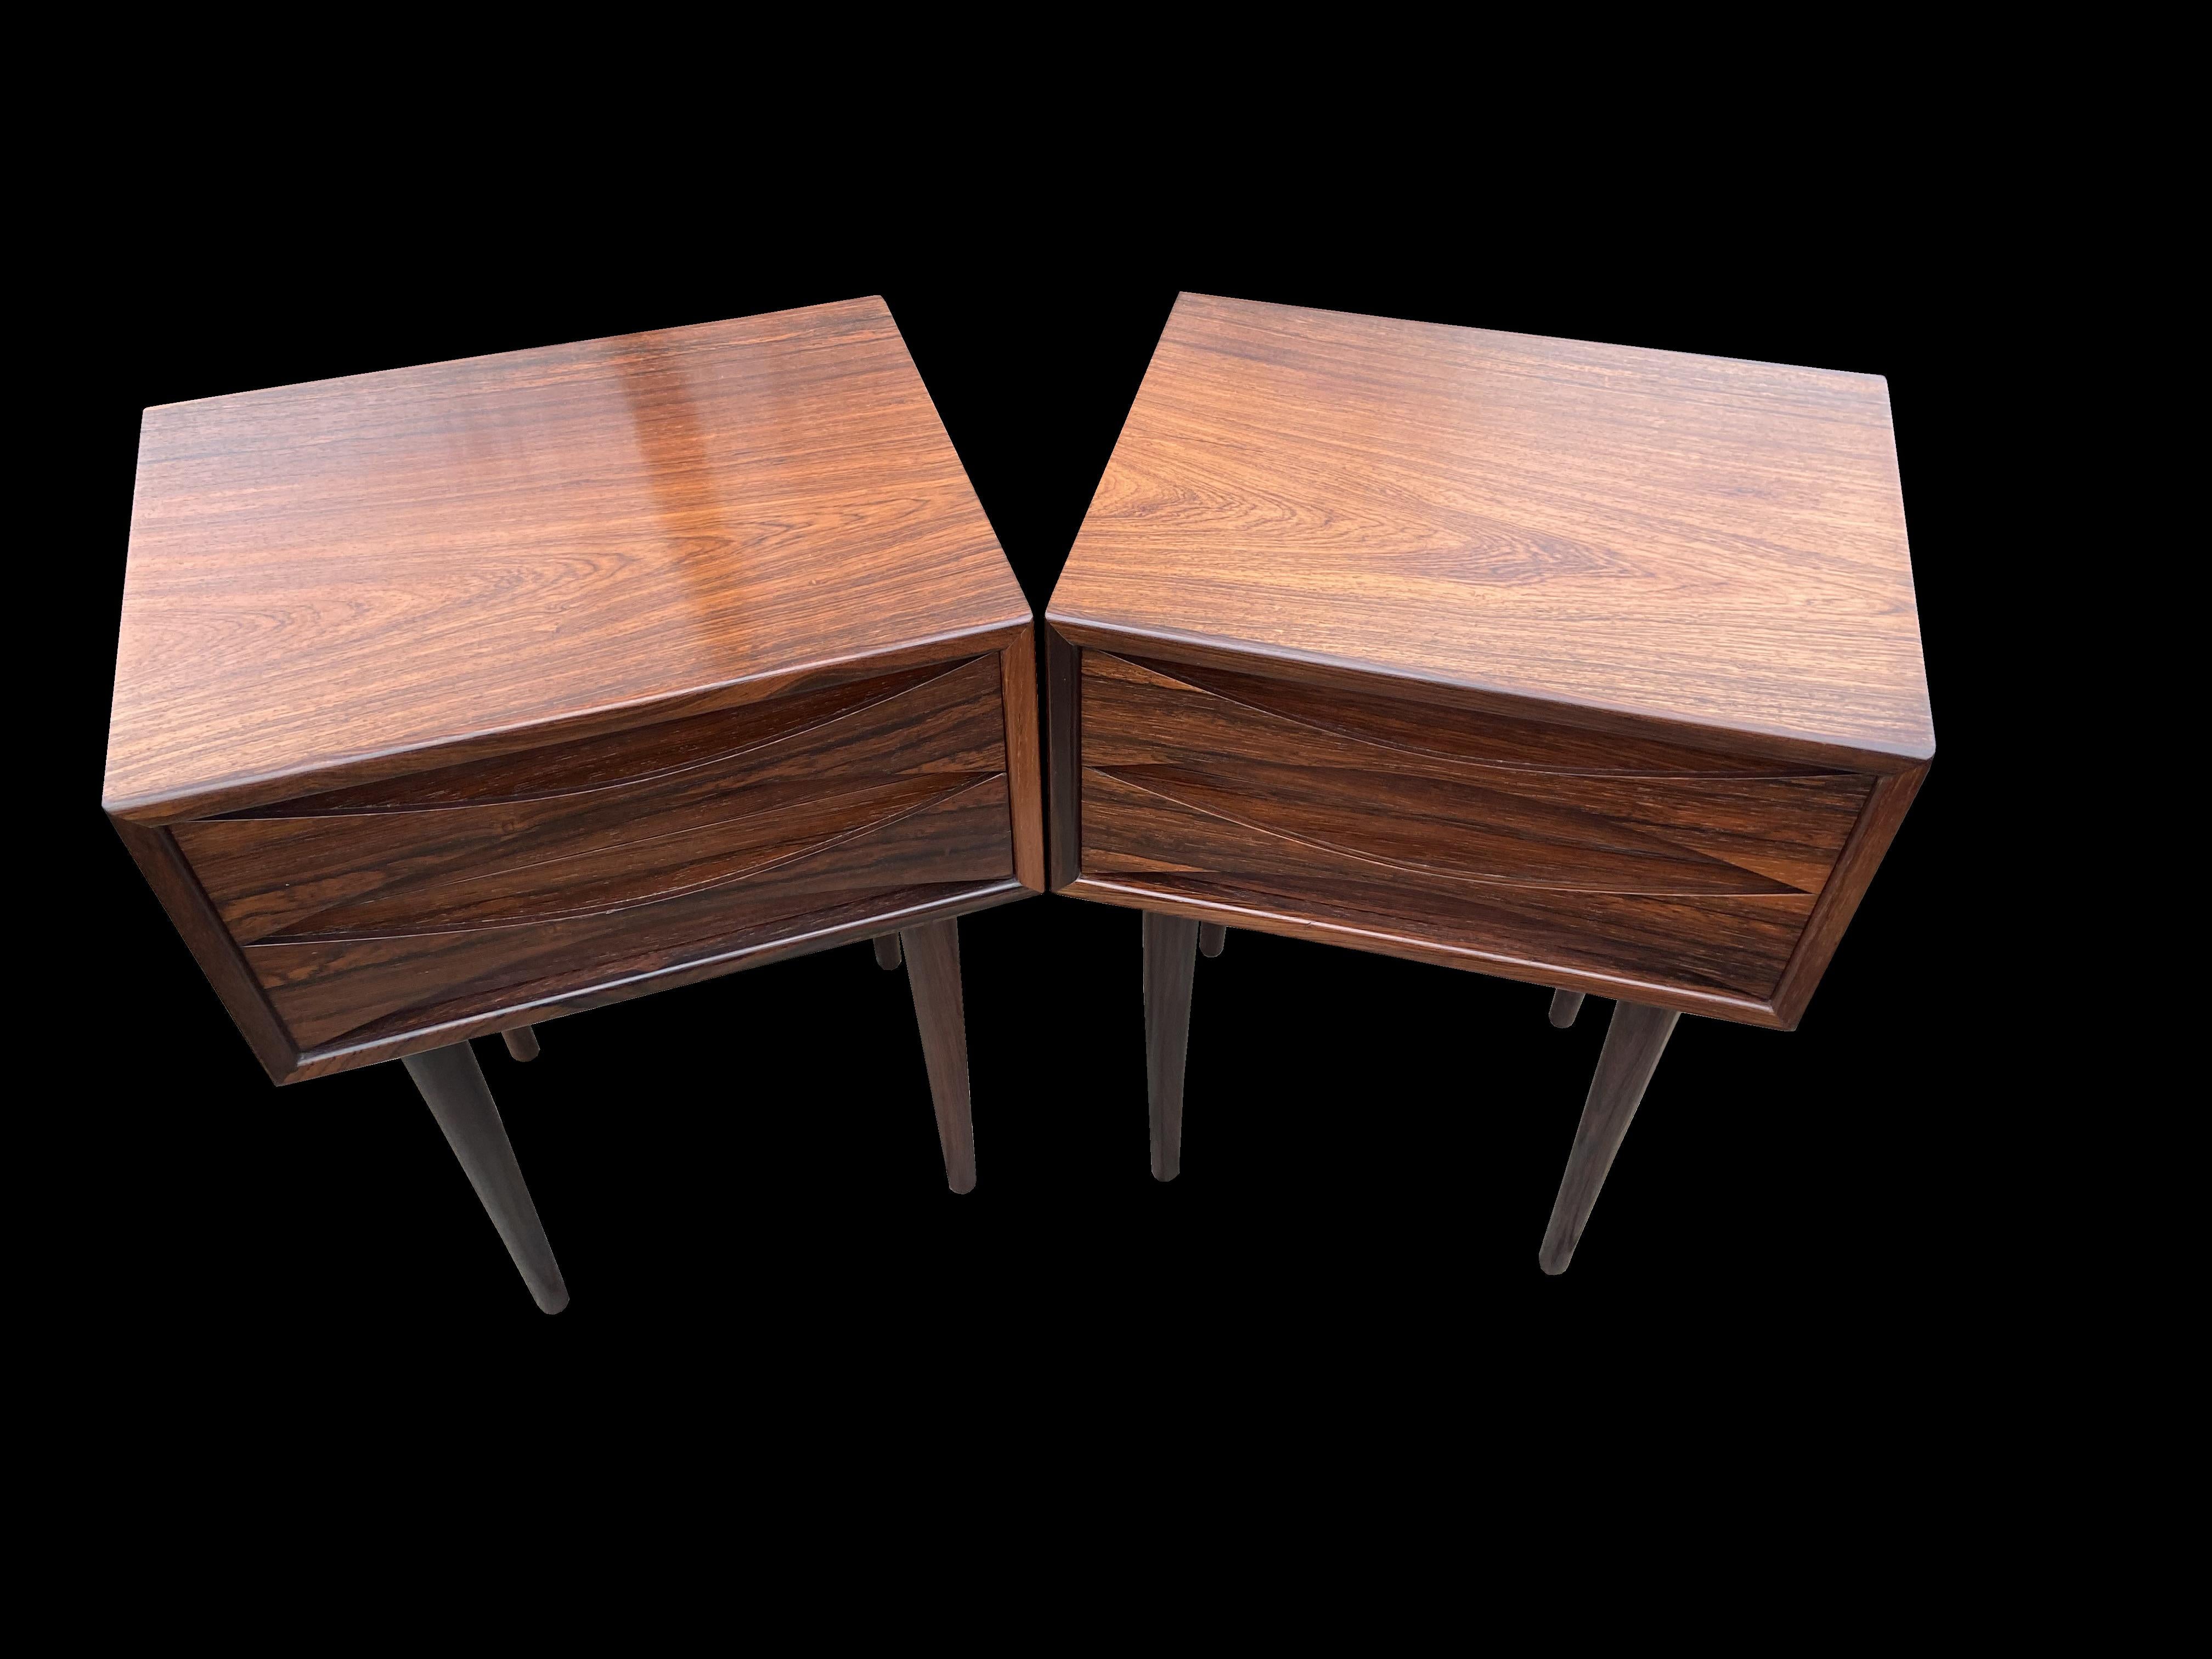 Scandinavian Modern Pair of Rosewood Bedside Tables by Niels Clausen for N.C.Mobler